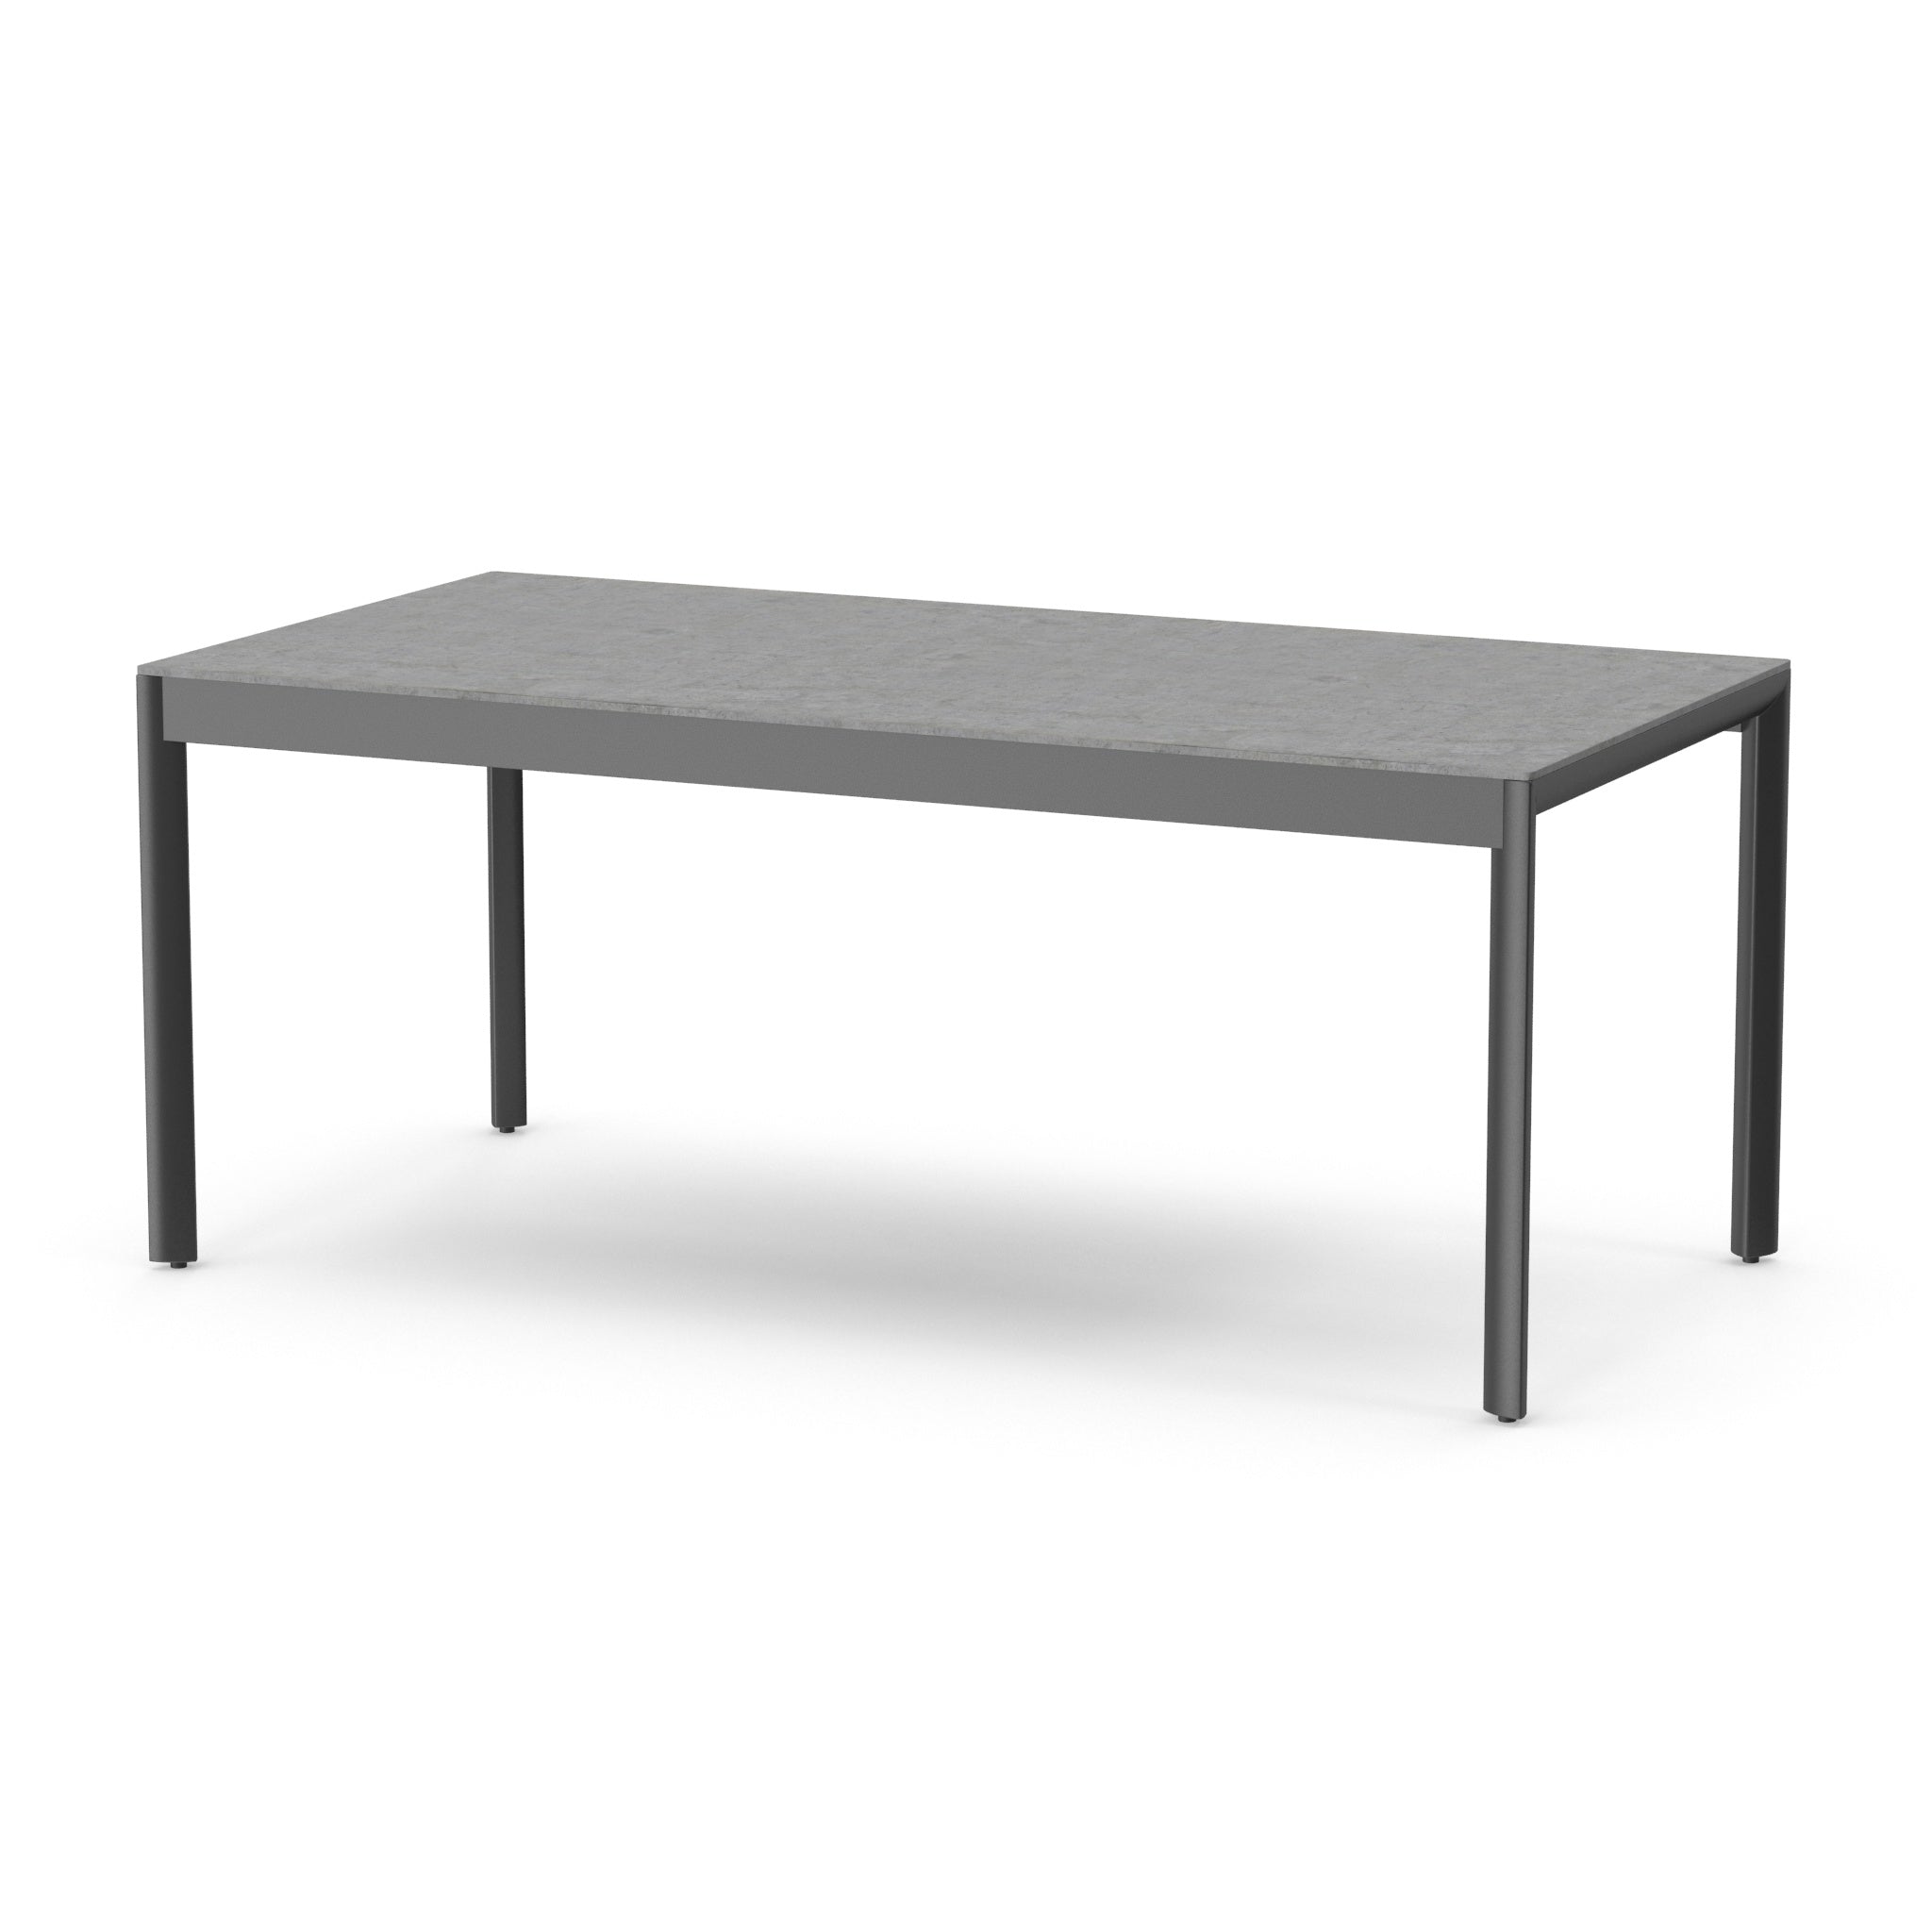 Ersa Dining Table